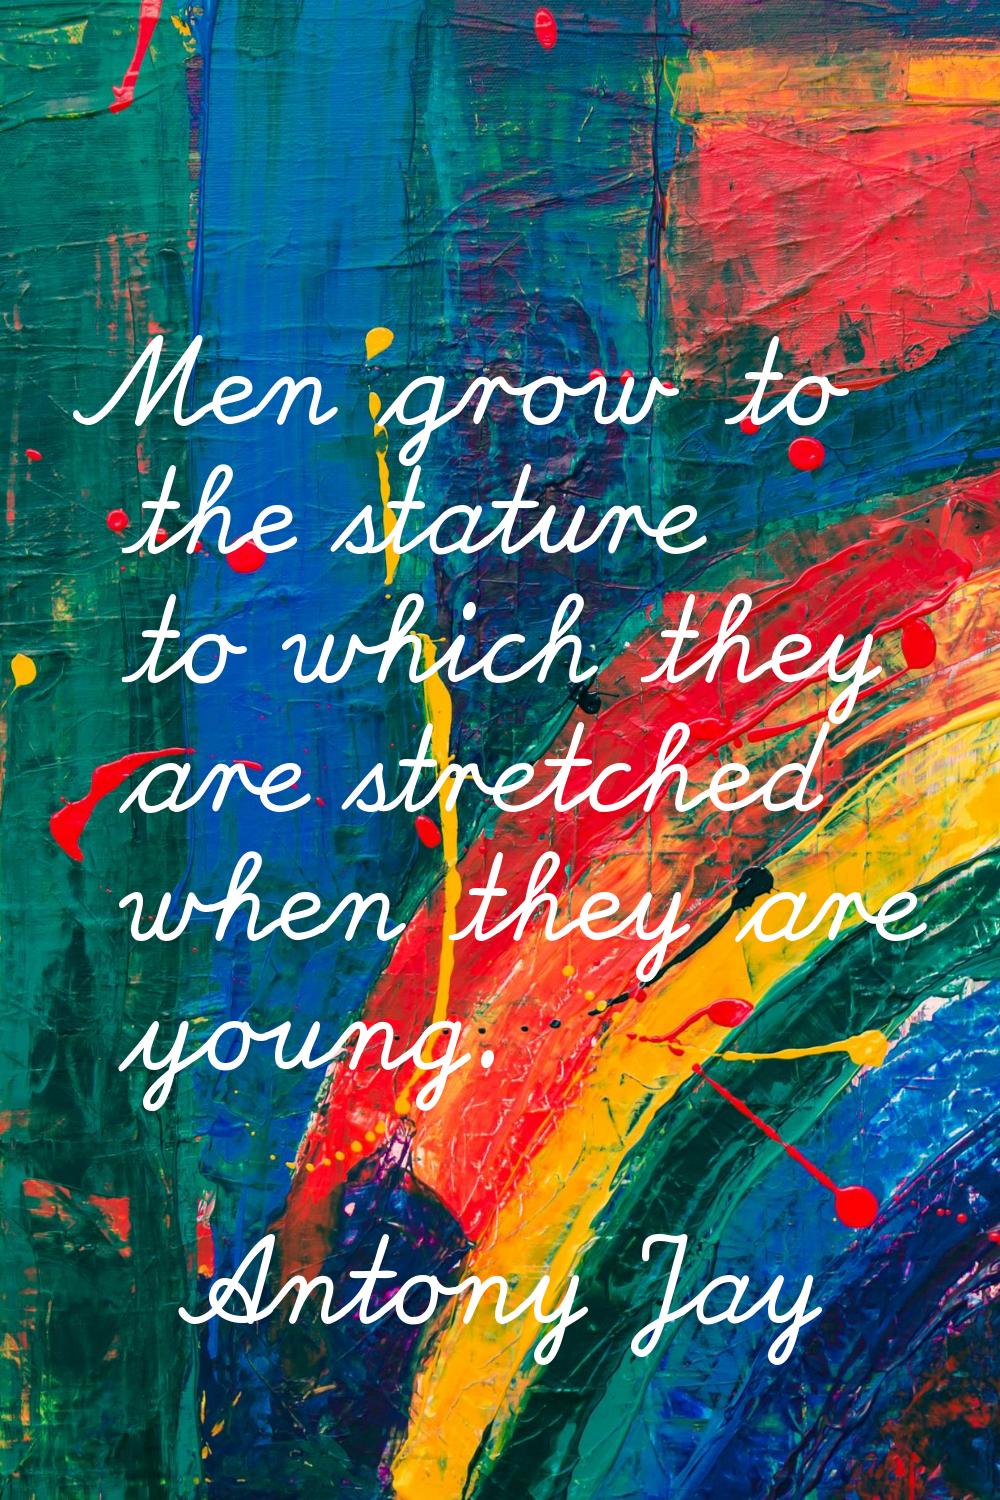 Men grow to the stature to which they are stretched when they are young.